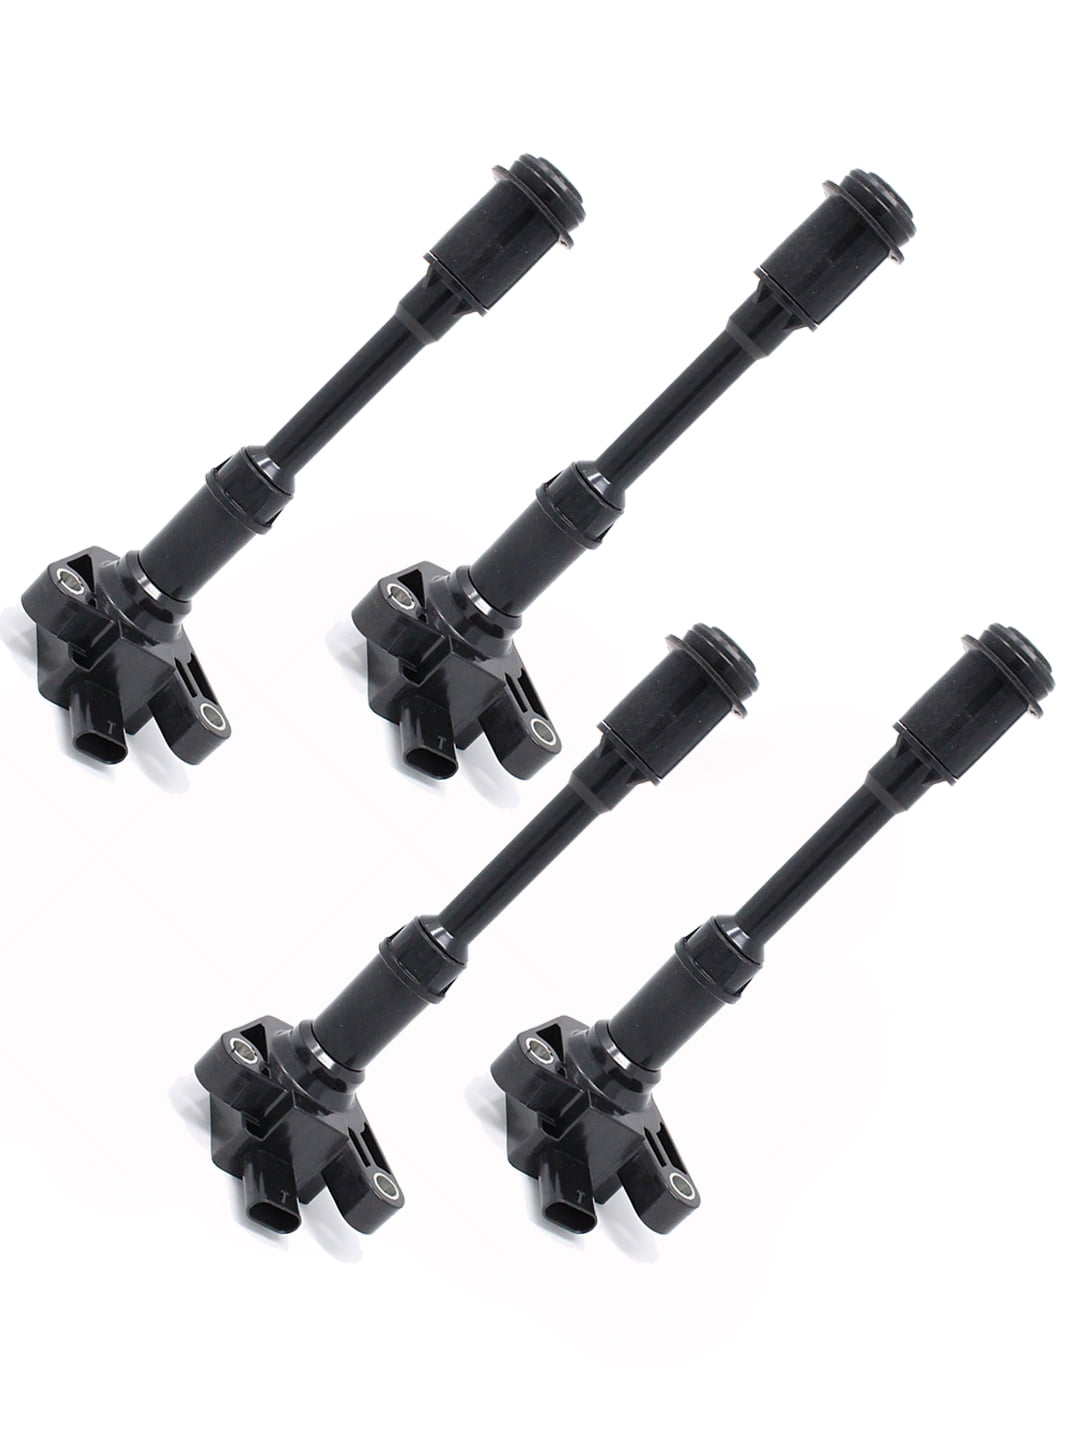 4 UF674 Ignition Coil Pack for Ford Escape 2013 2014 2015 2016 1.6L L4 